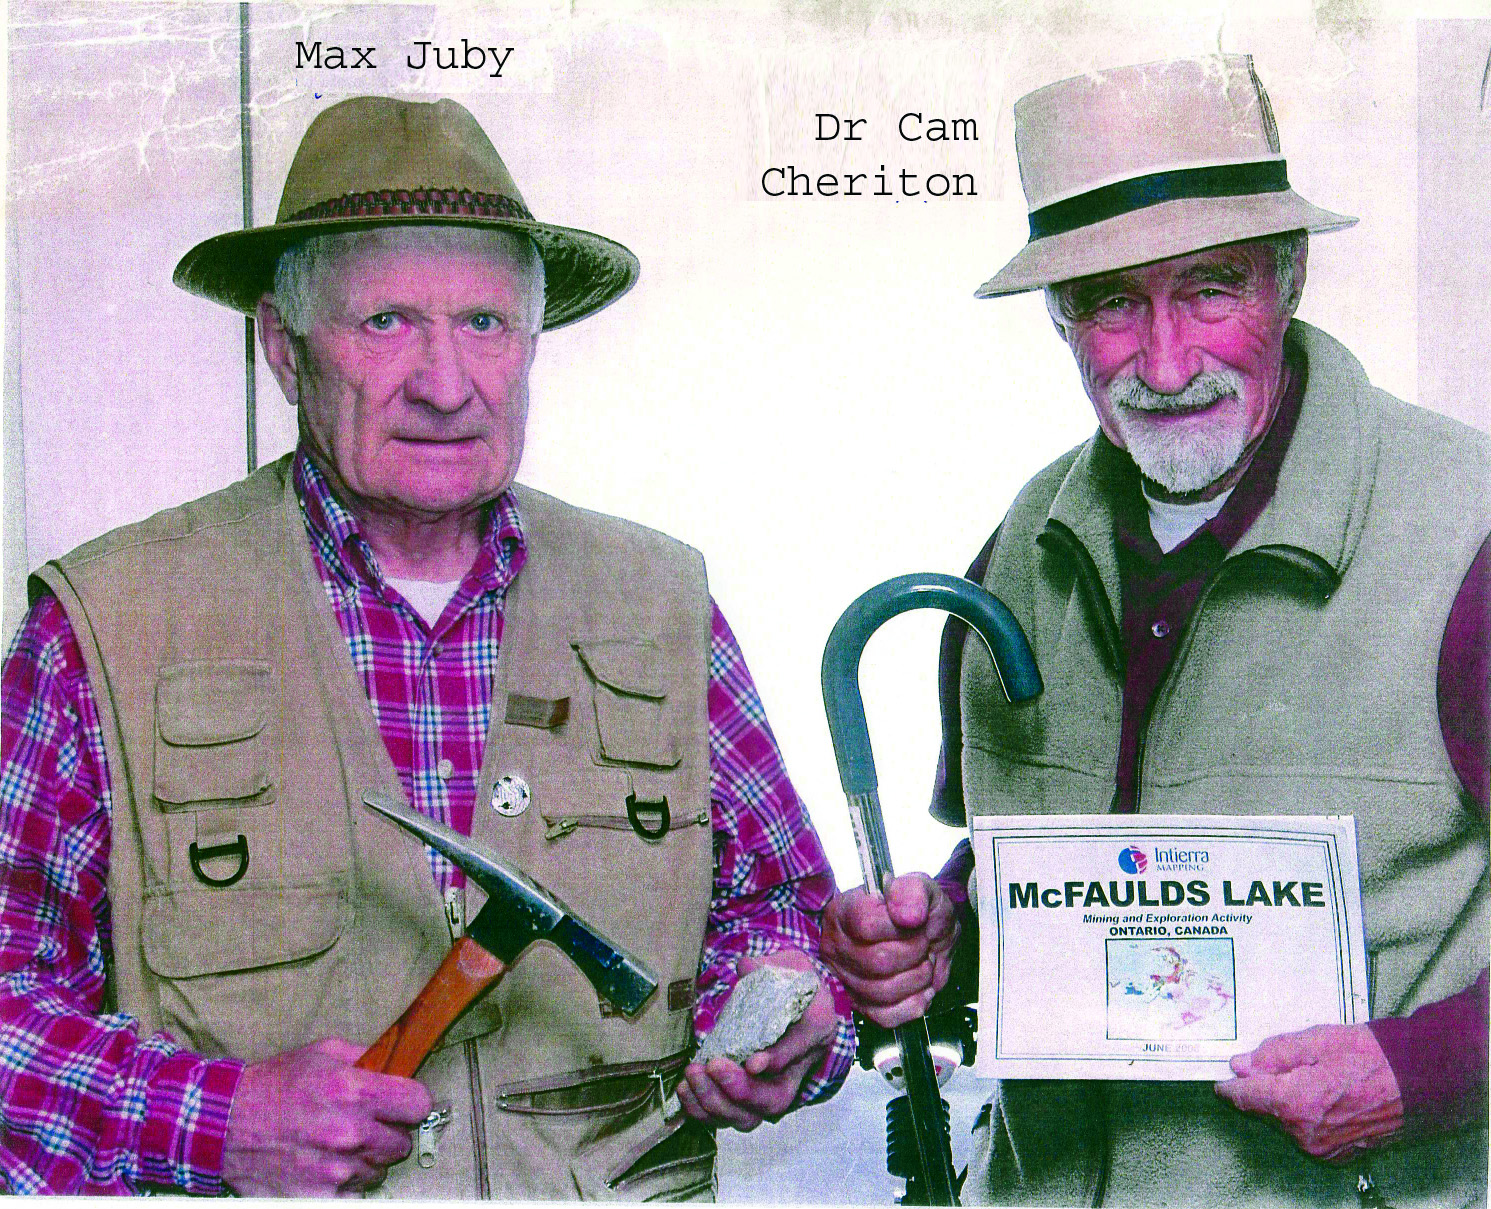 Max Juby with Dr Cam Cheriton, at McFaulds Lake, Ontario